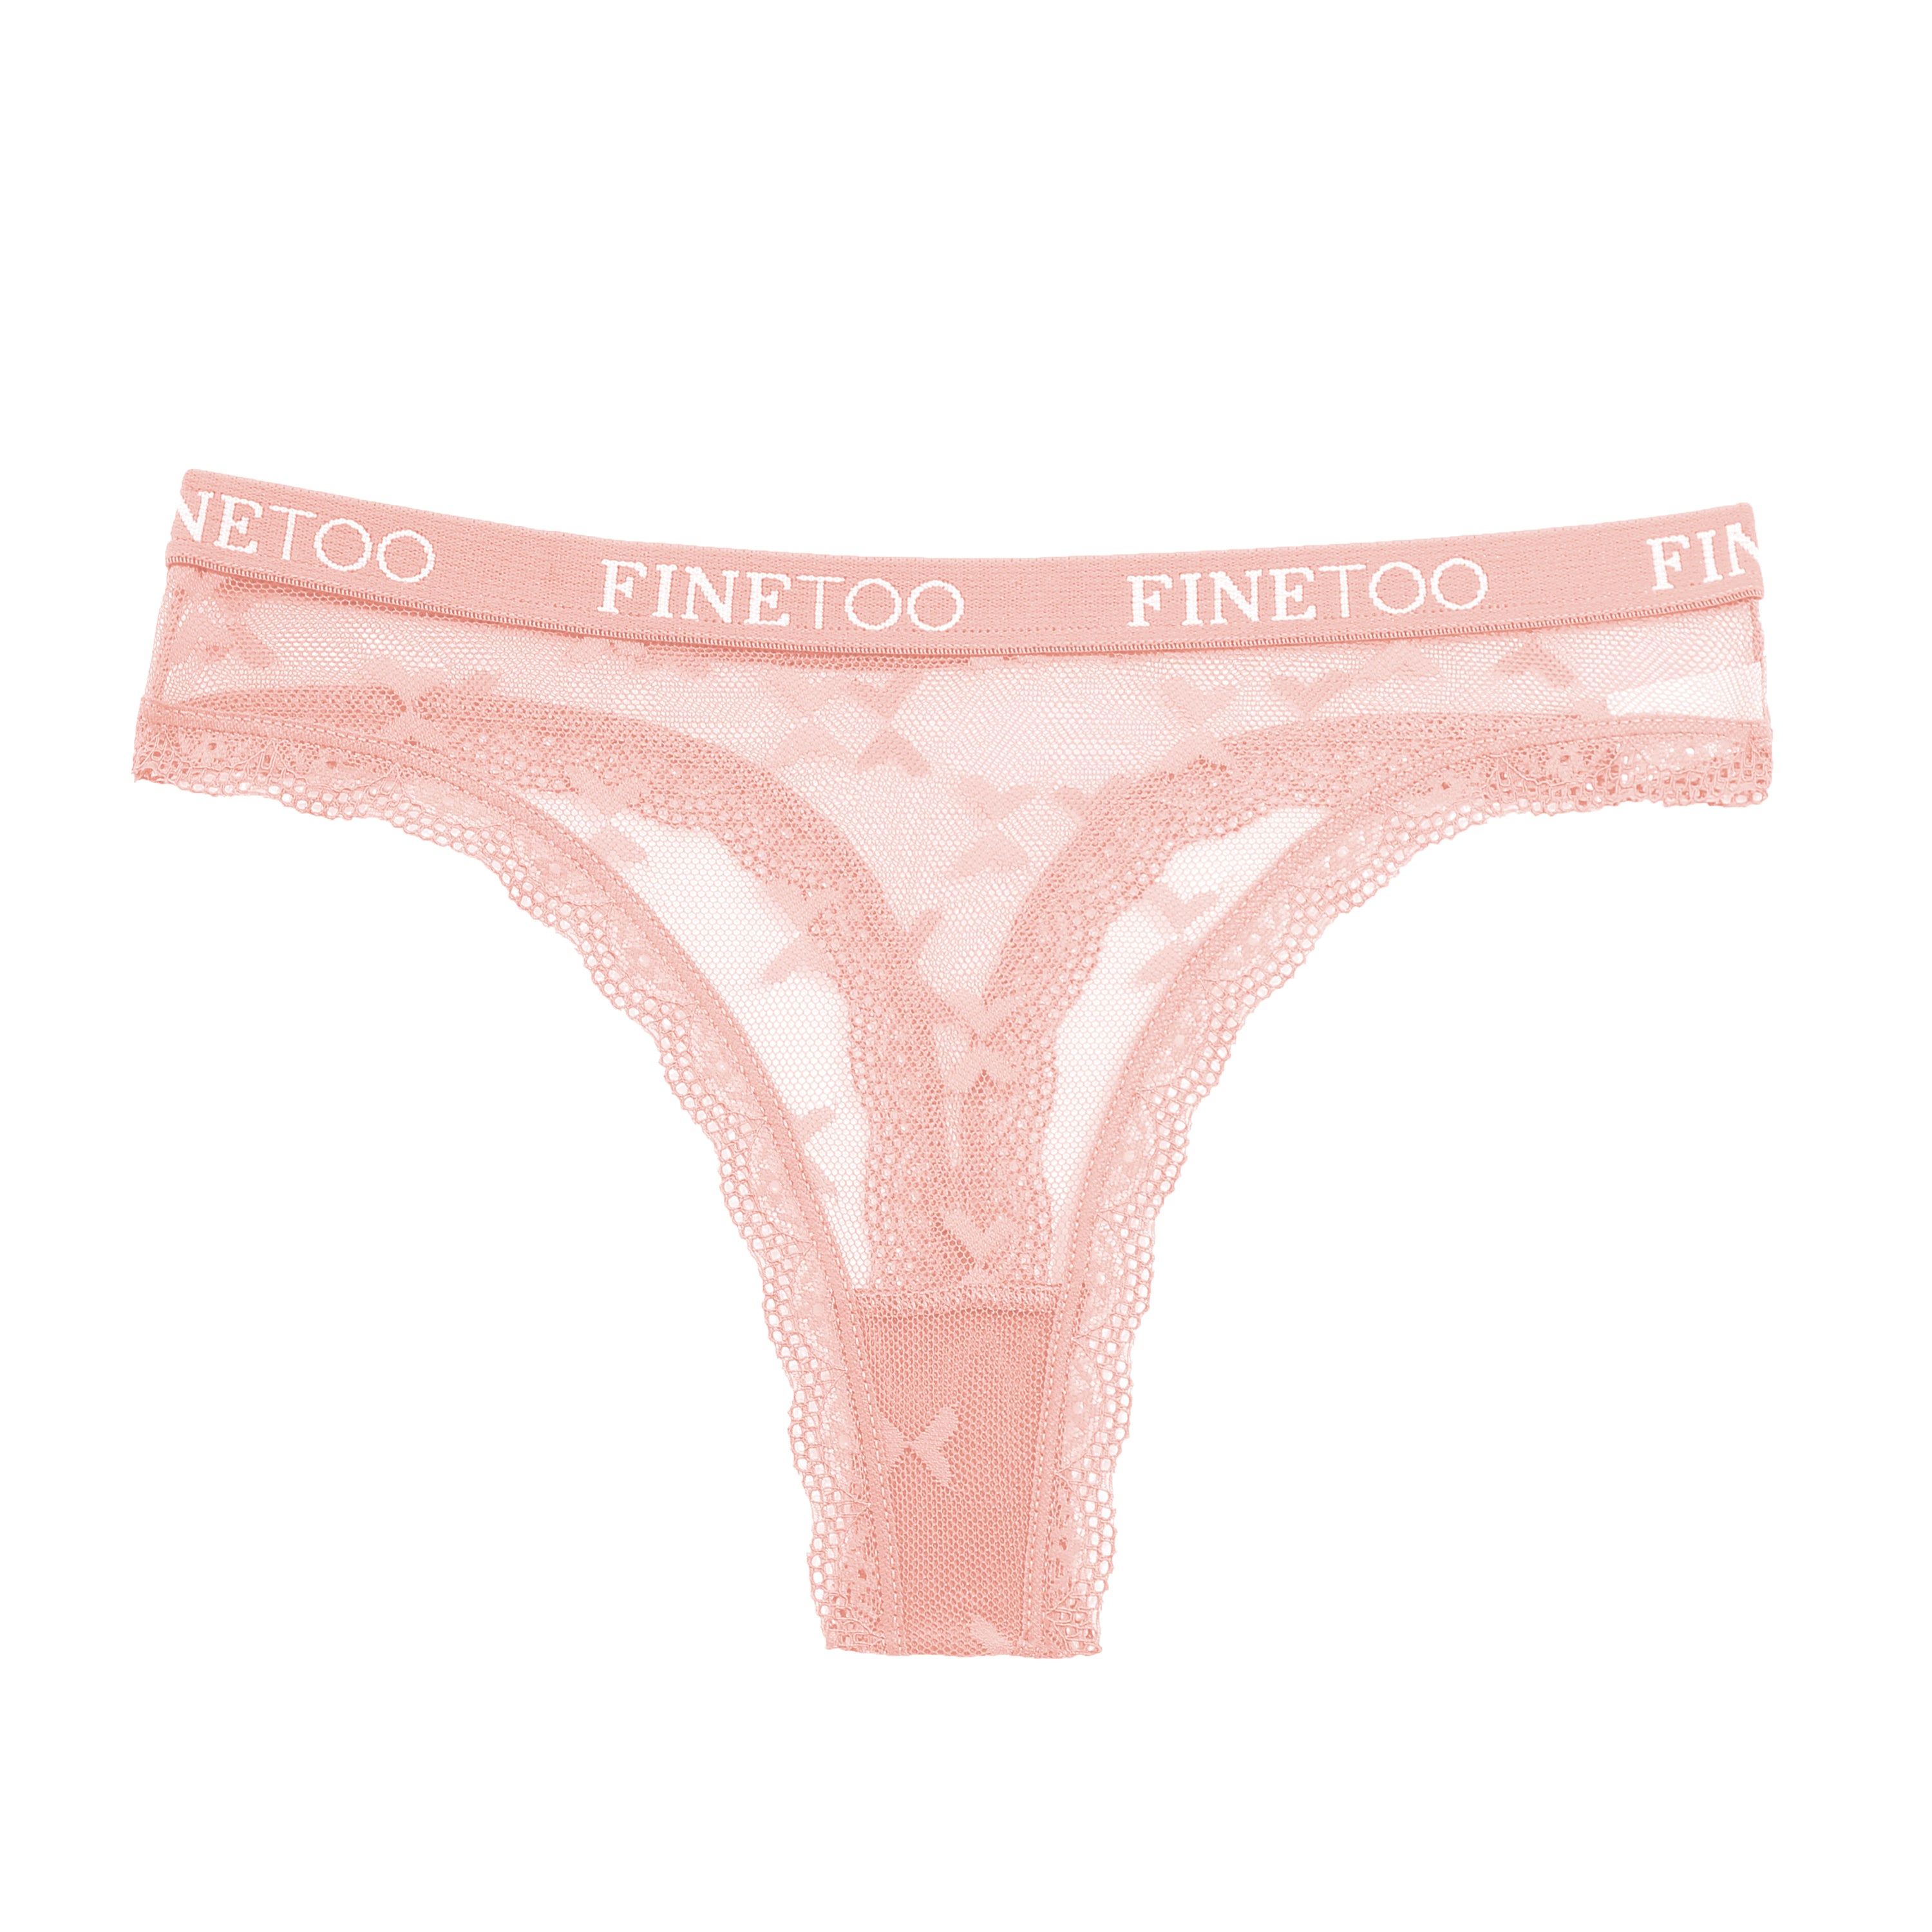 FINETOO 10 Pack Cotton Thongs for Women Breathable Low Rise Bikini